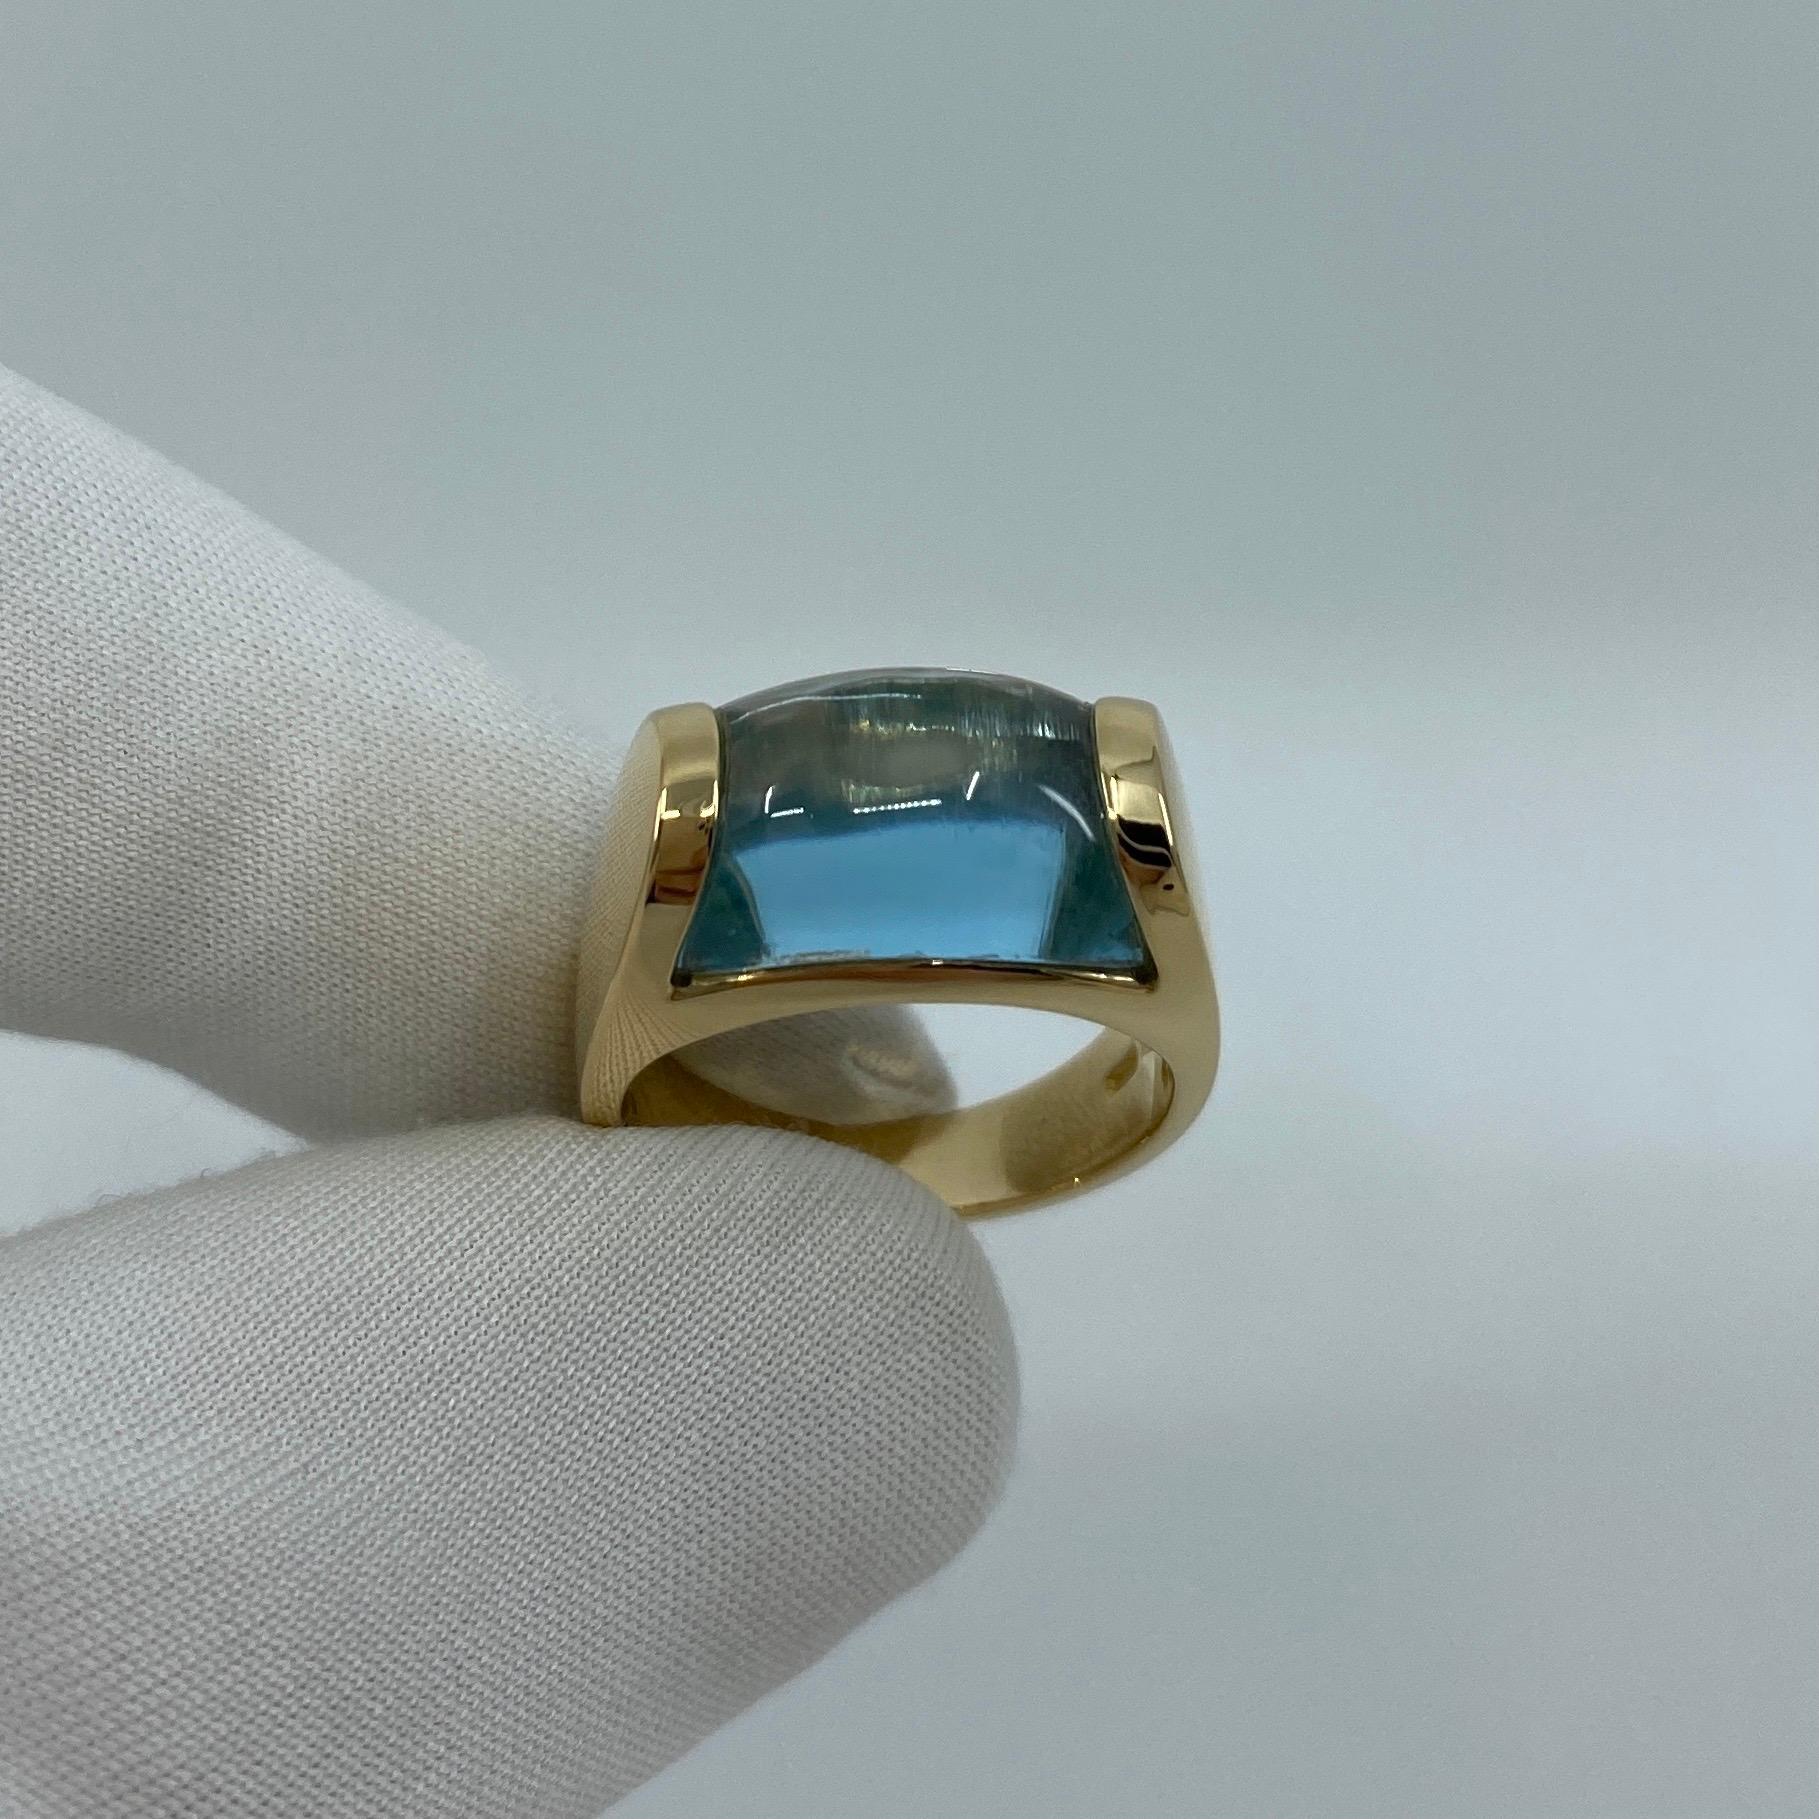 Bvlgari Blue Topaz Tronchetto 18k Yellow Gold Ring.

Beautiful domed blue topaz set in a fine 18k yellow gold tension set ring.

In excellent condition, has been professionally polished and cleaned.

Ring size UK: L1/2
US 6. 

Comes with original